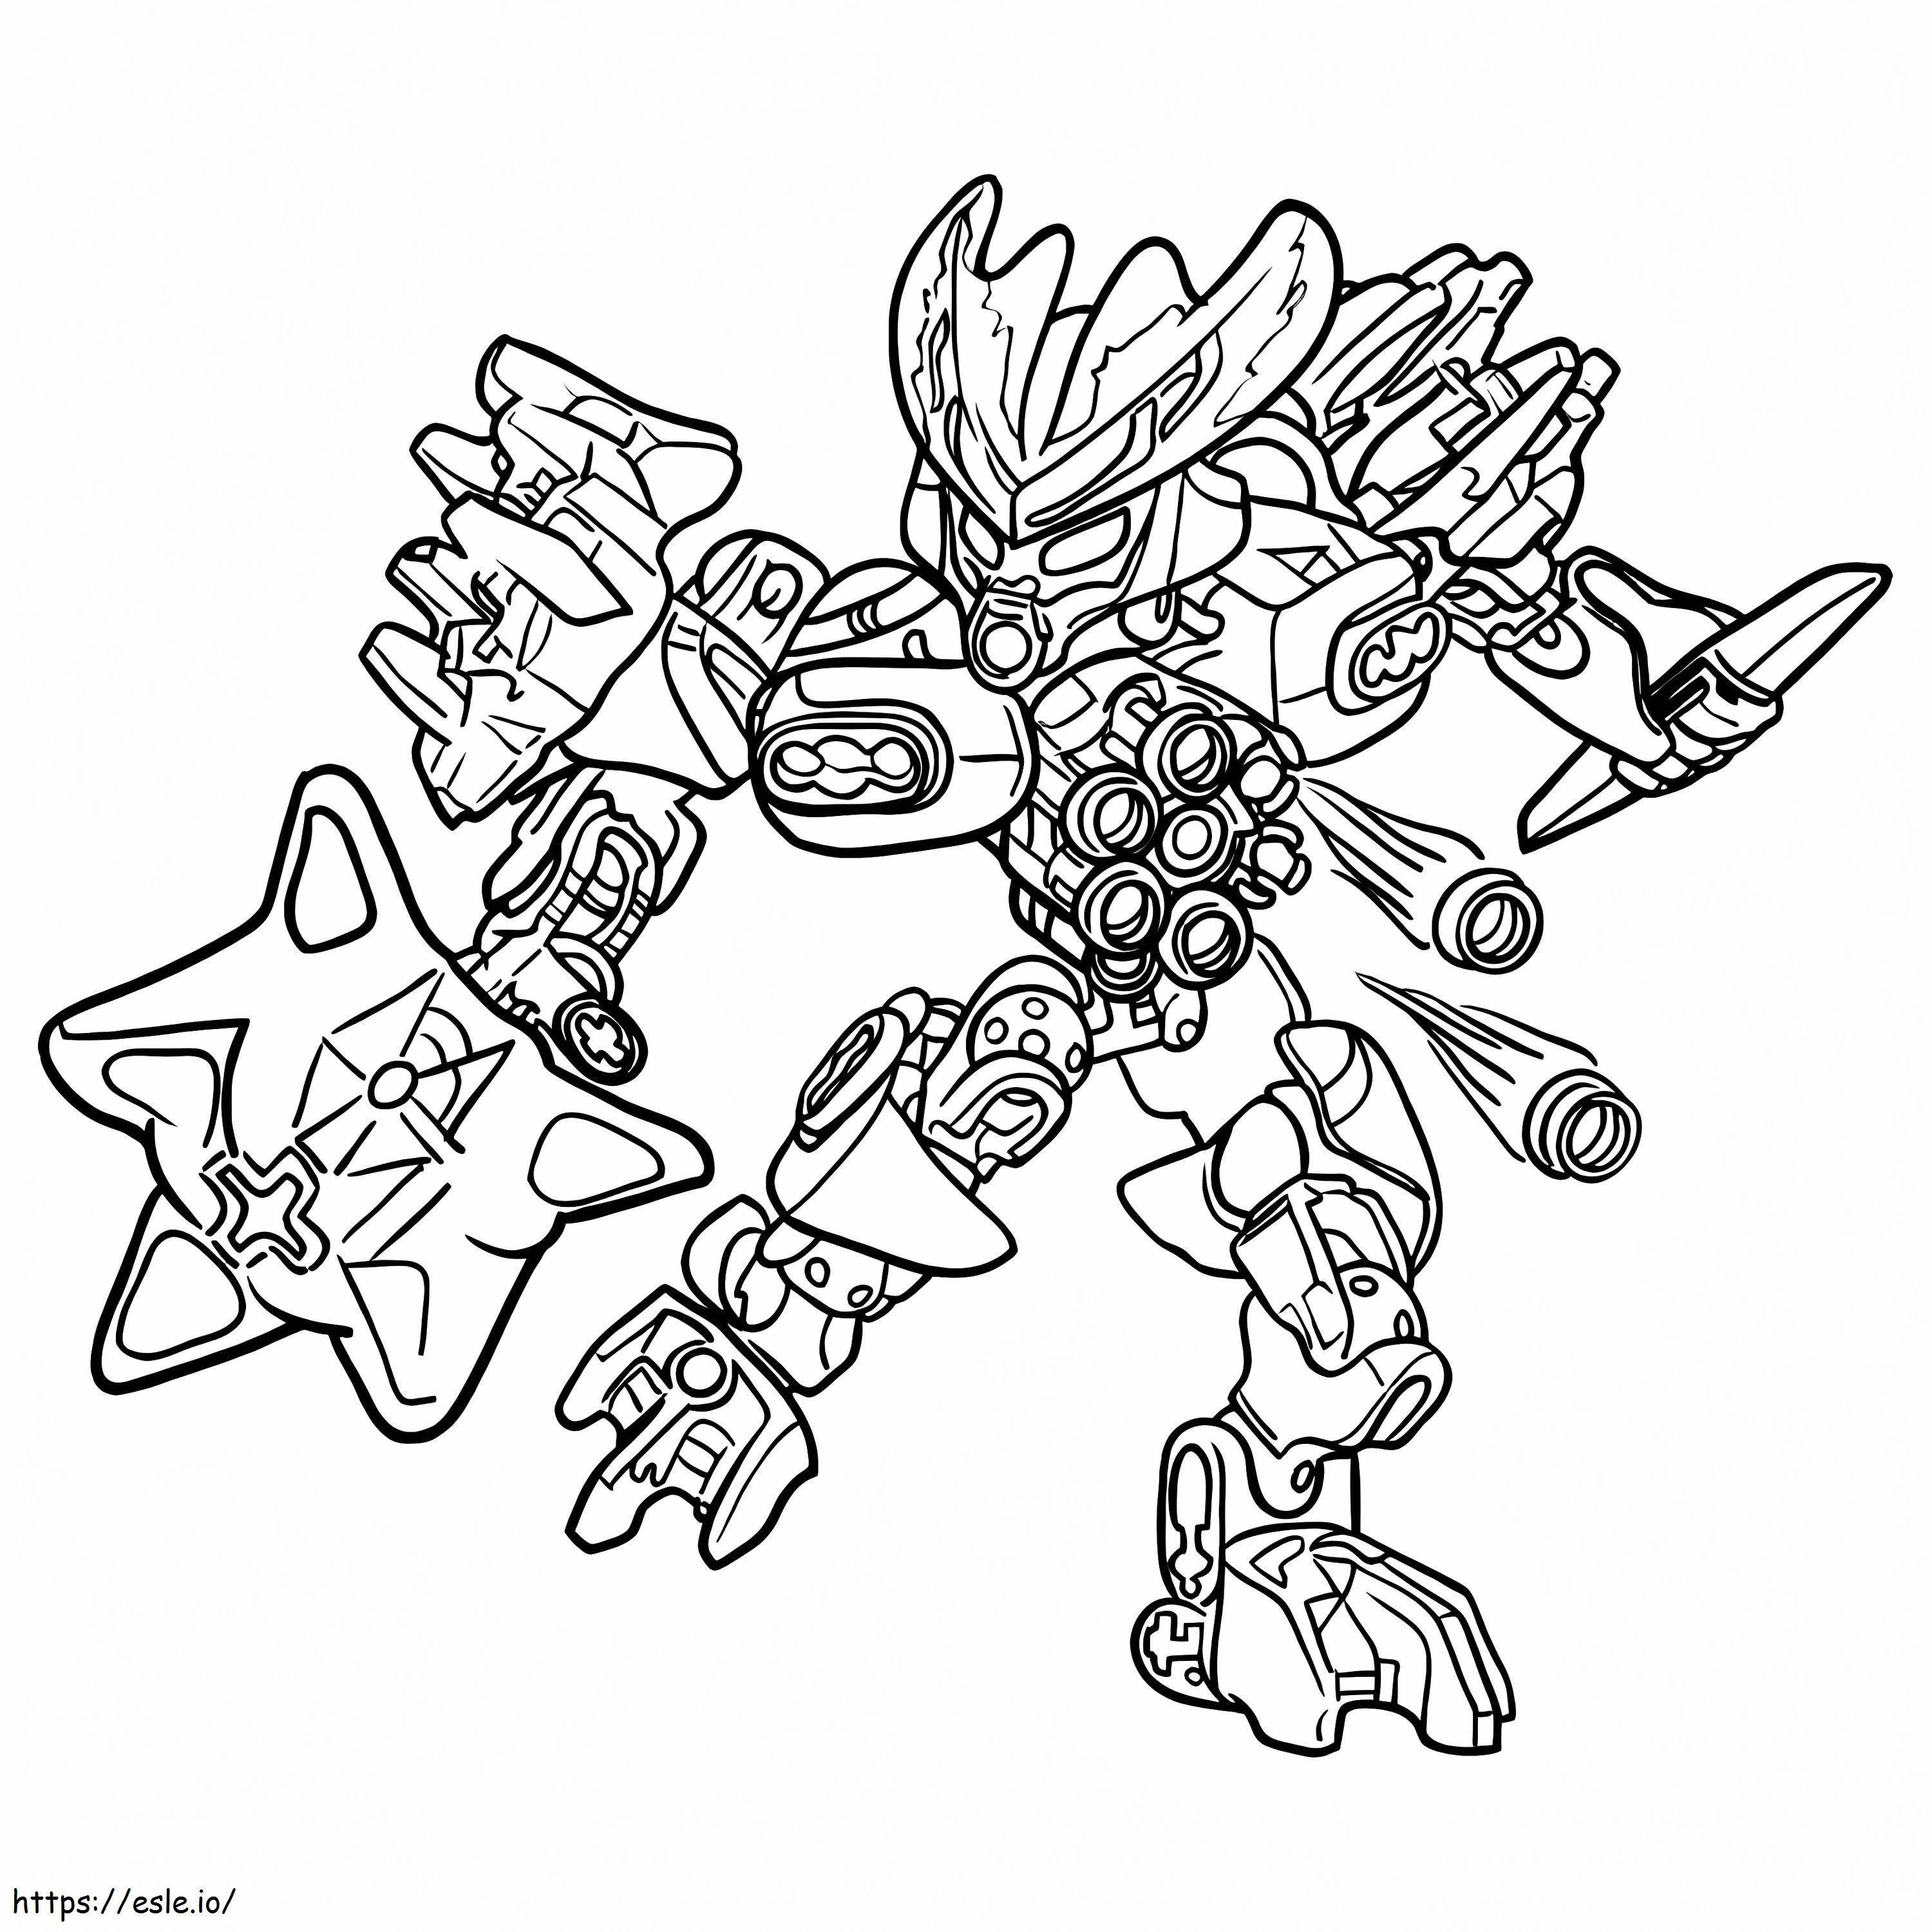 Protector Of Earth Bionicle coloring page